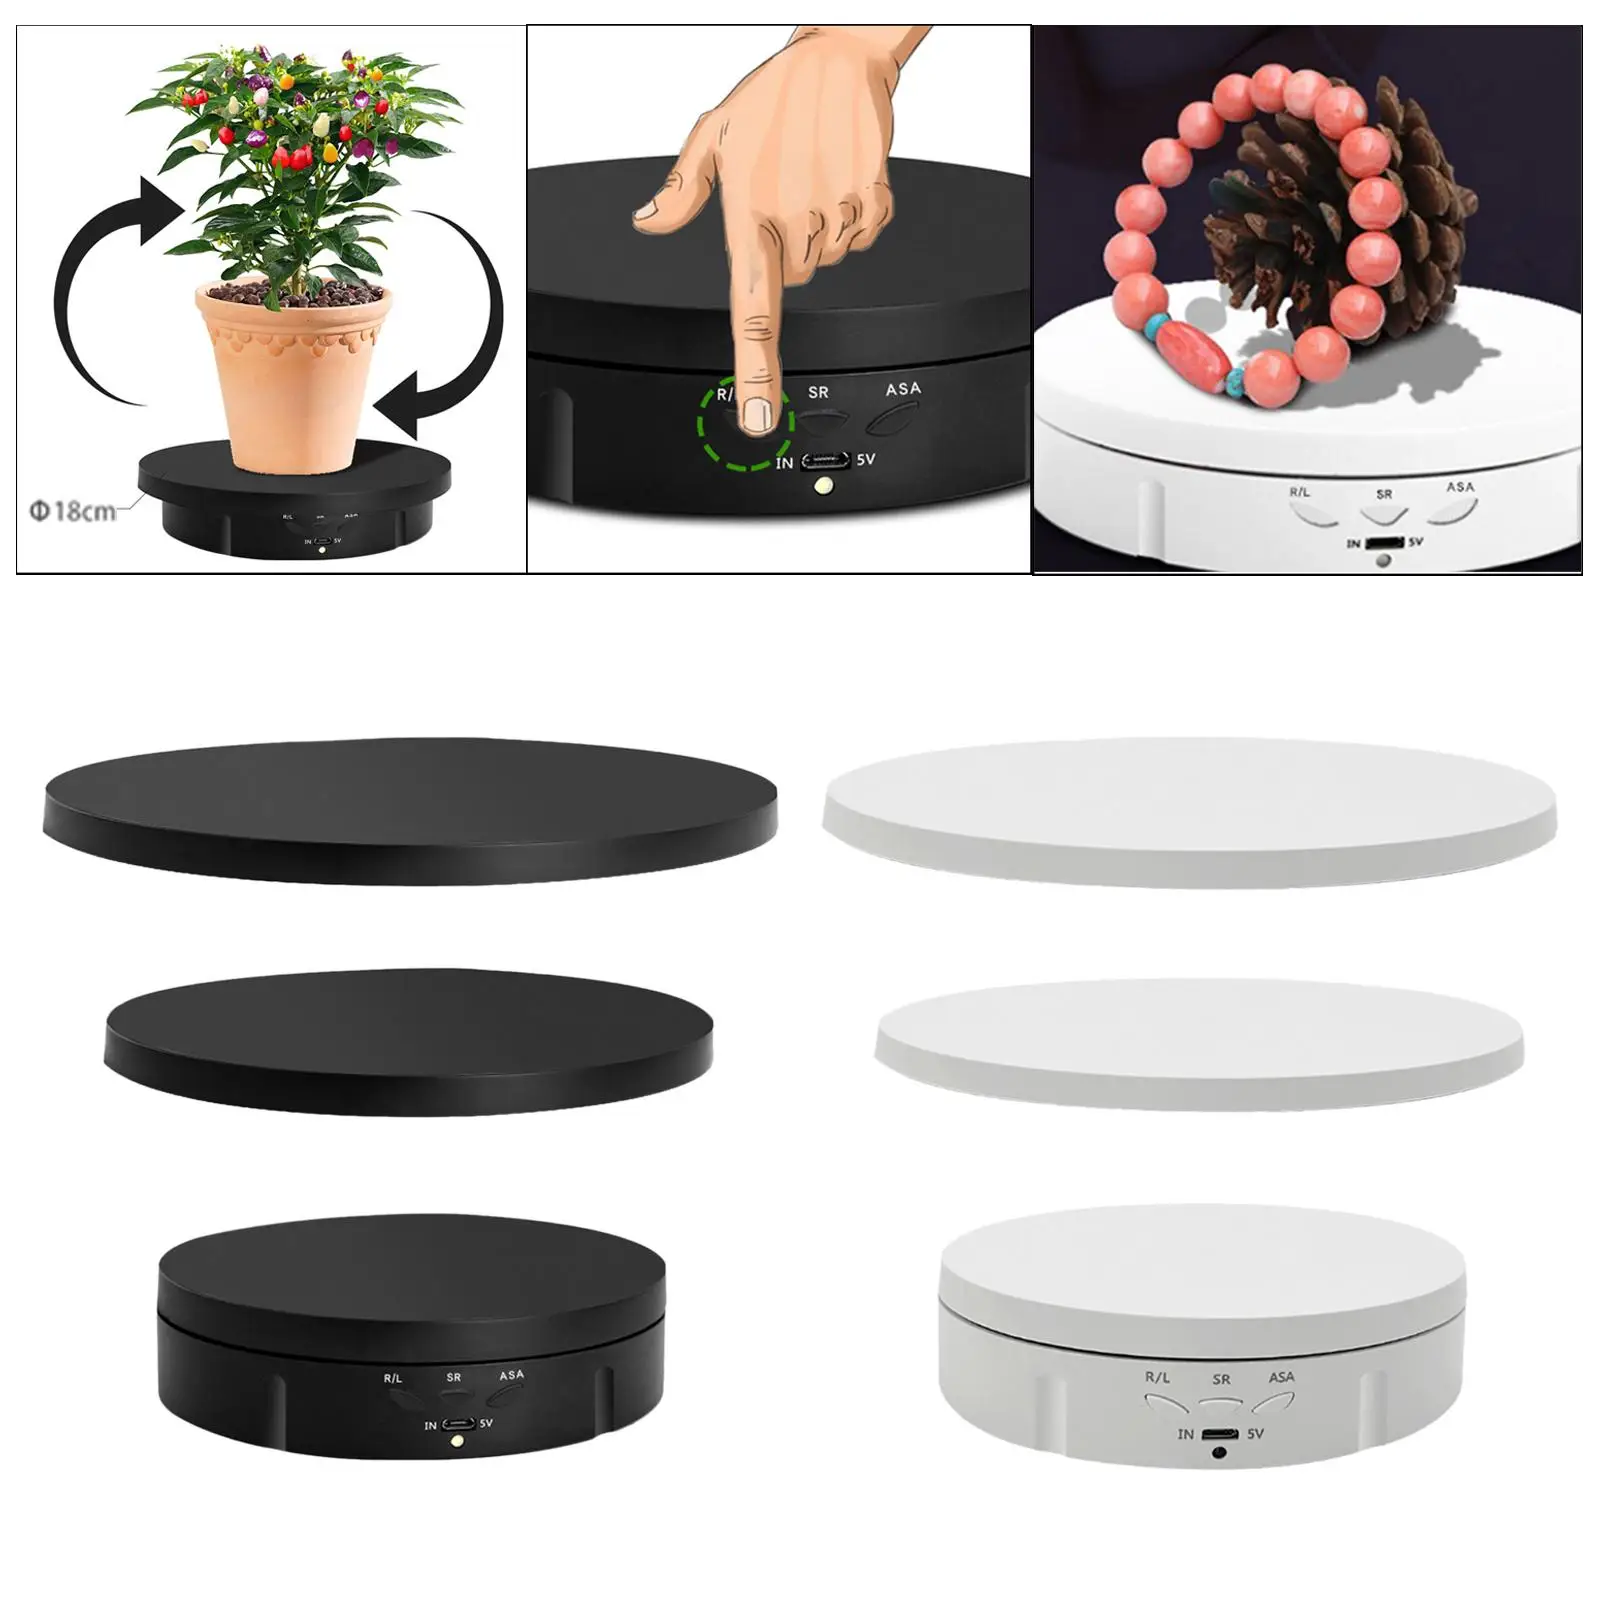 Motorized Rotating Display Stand Multifunctional 3 Sizes Replacements Turntable Rotating Plate Silient for Models Cake Jewelry